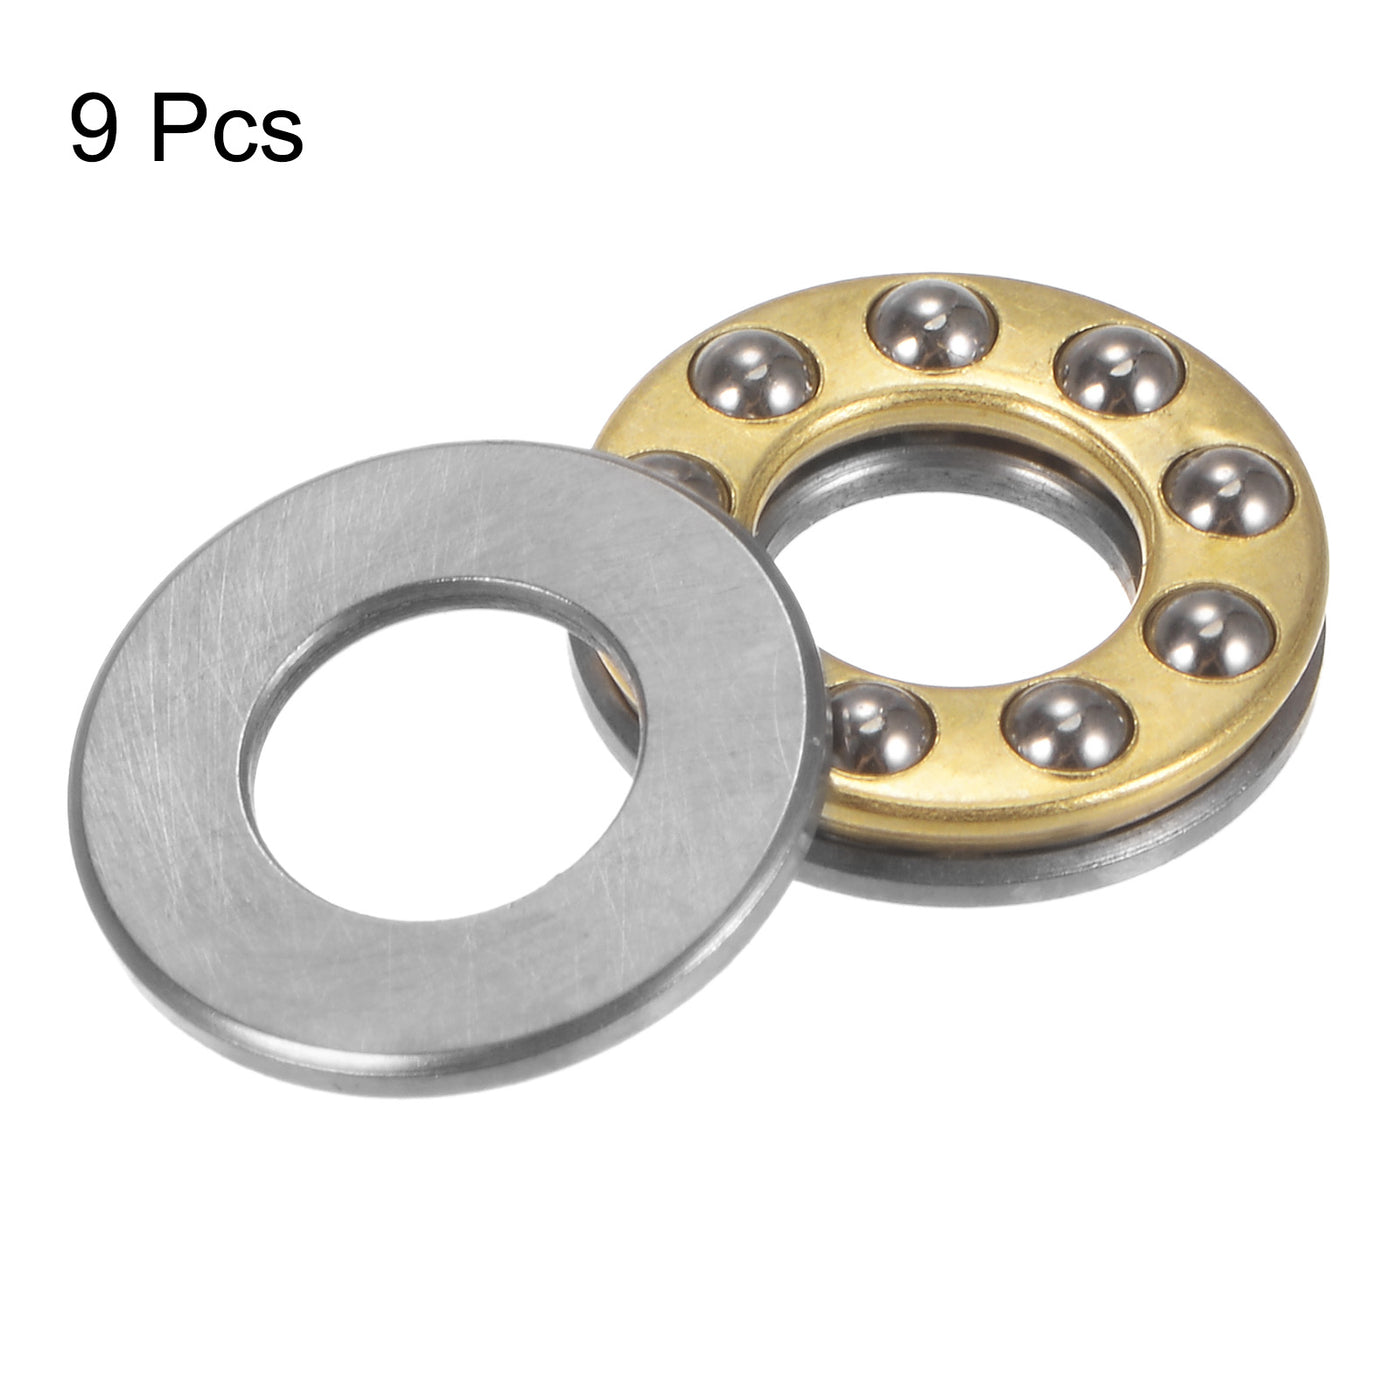 uxcell Uxcell F8-16M Thrust Ball Bearing 8x16x5mm Brass with Washers 9pcs